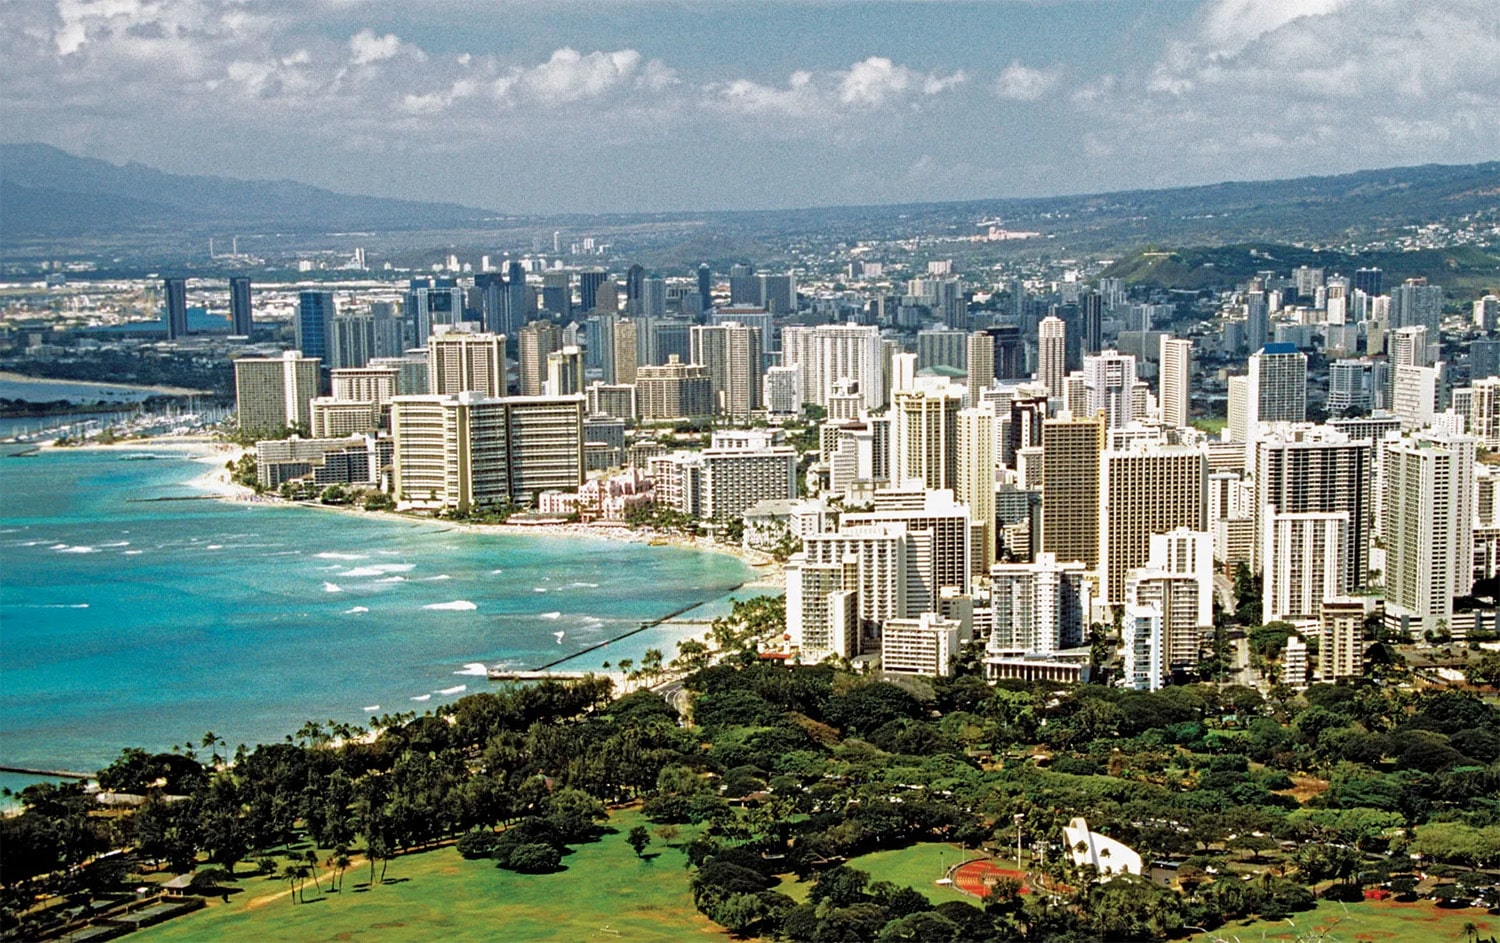 29 interesting facts about Honolulu